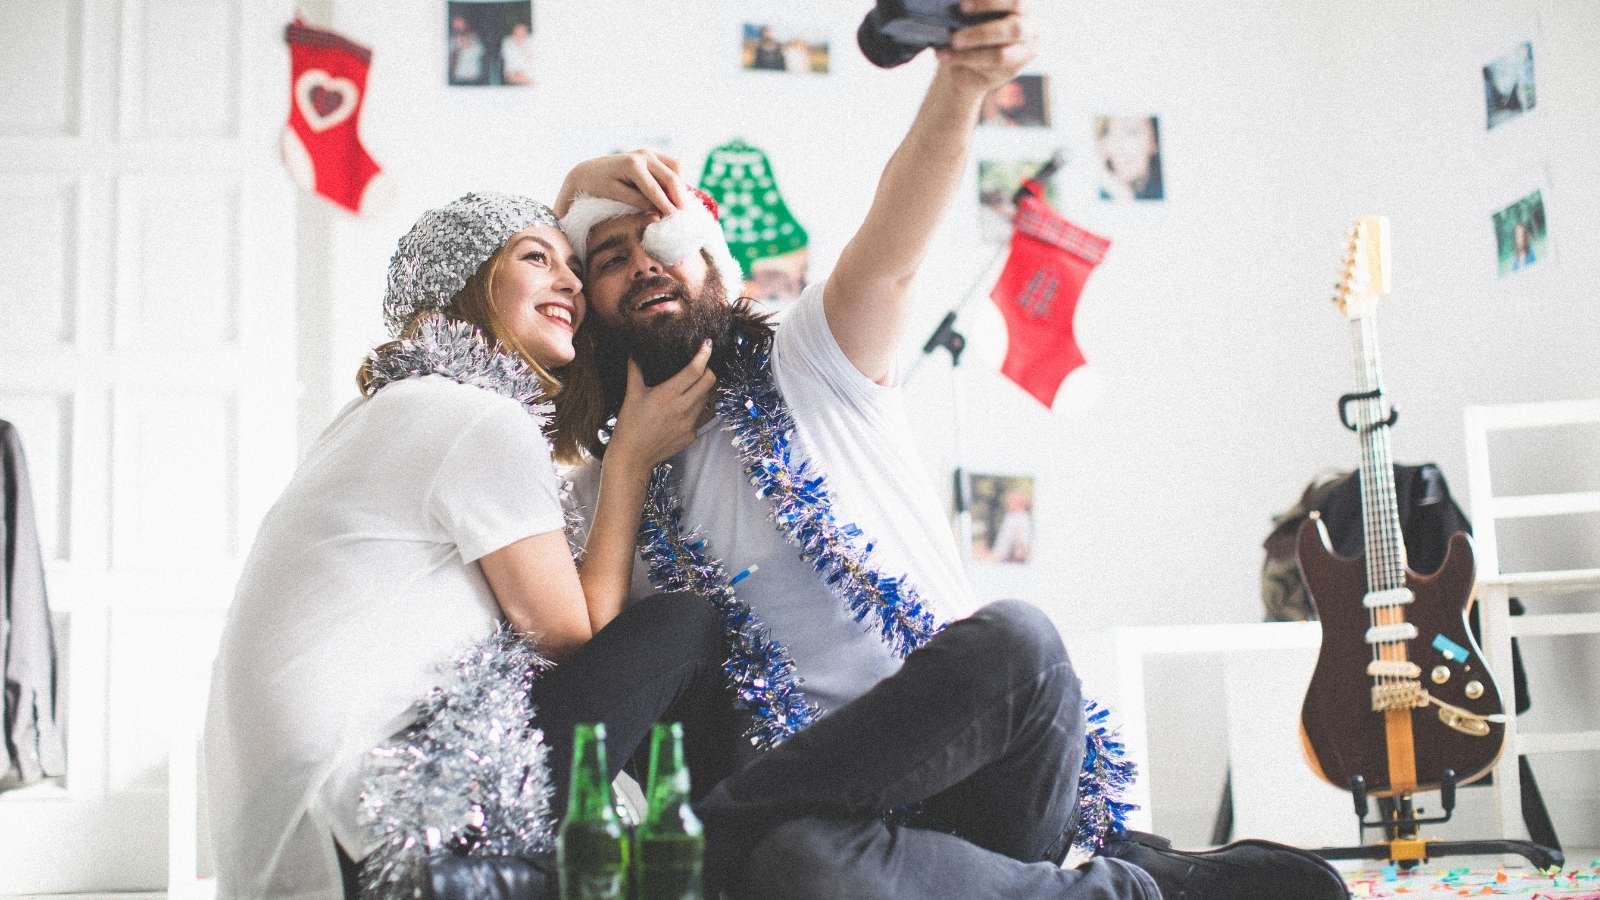 How to leverage user-generated content at Christmas